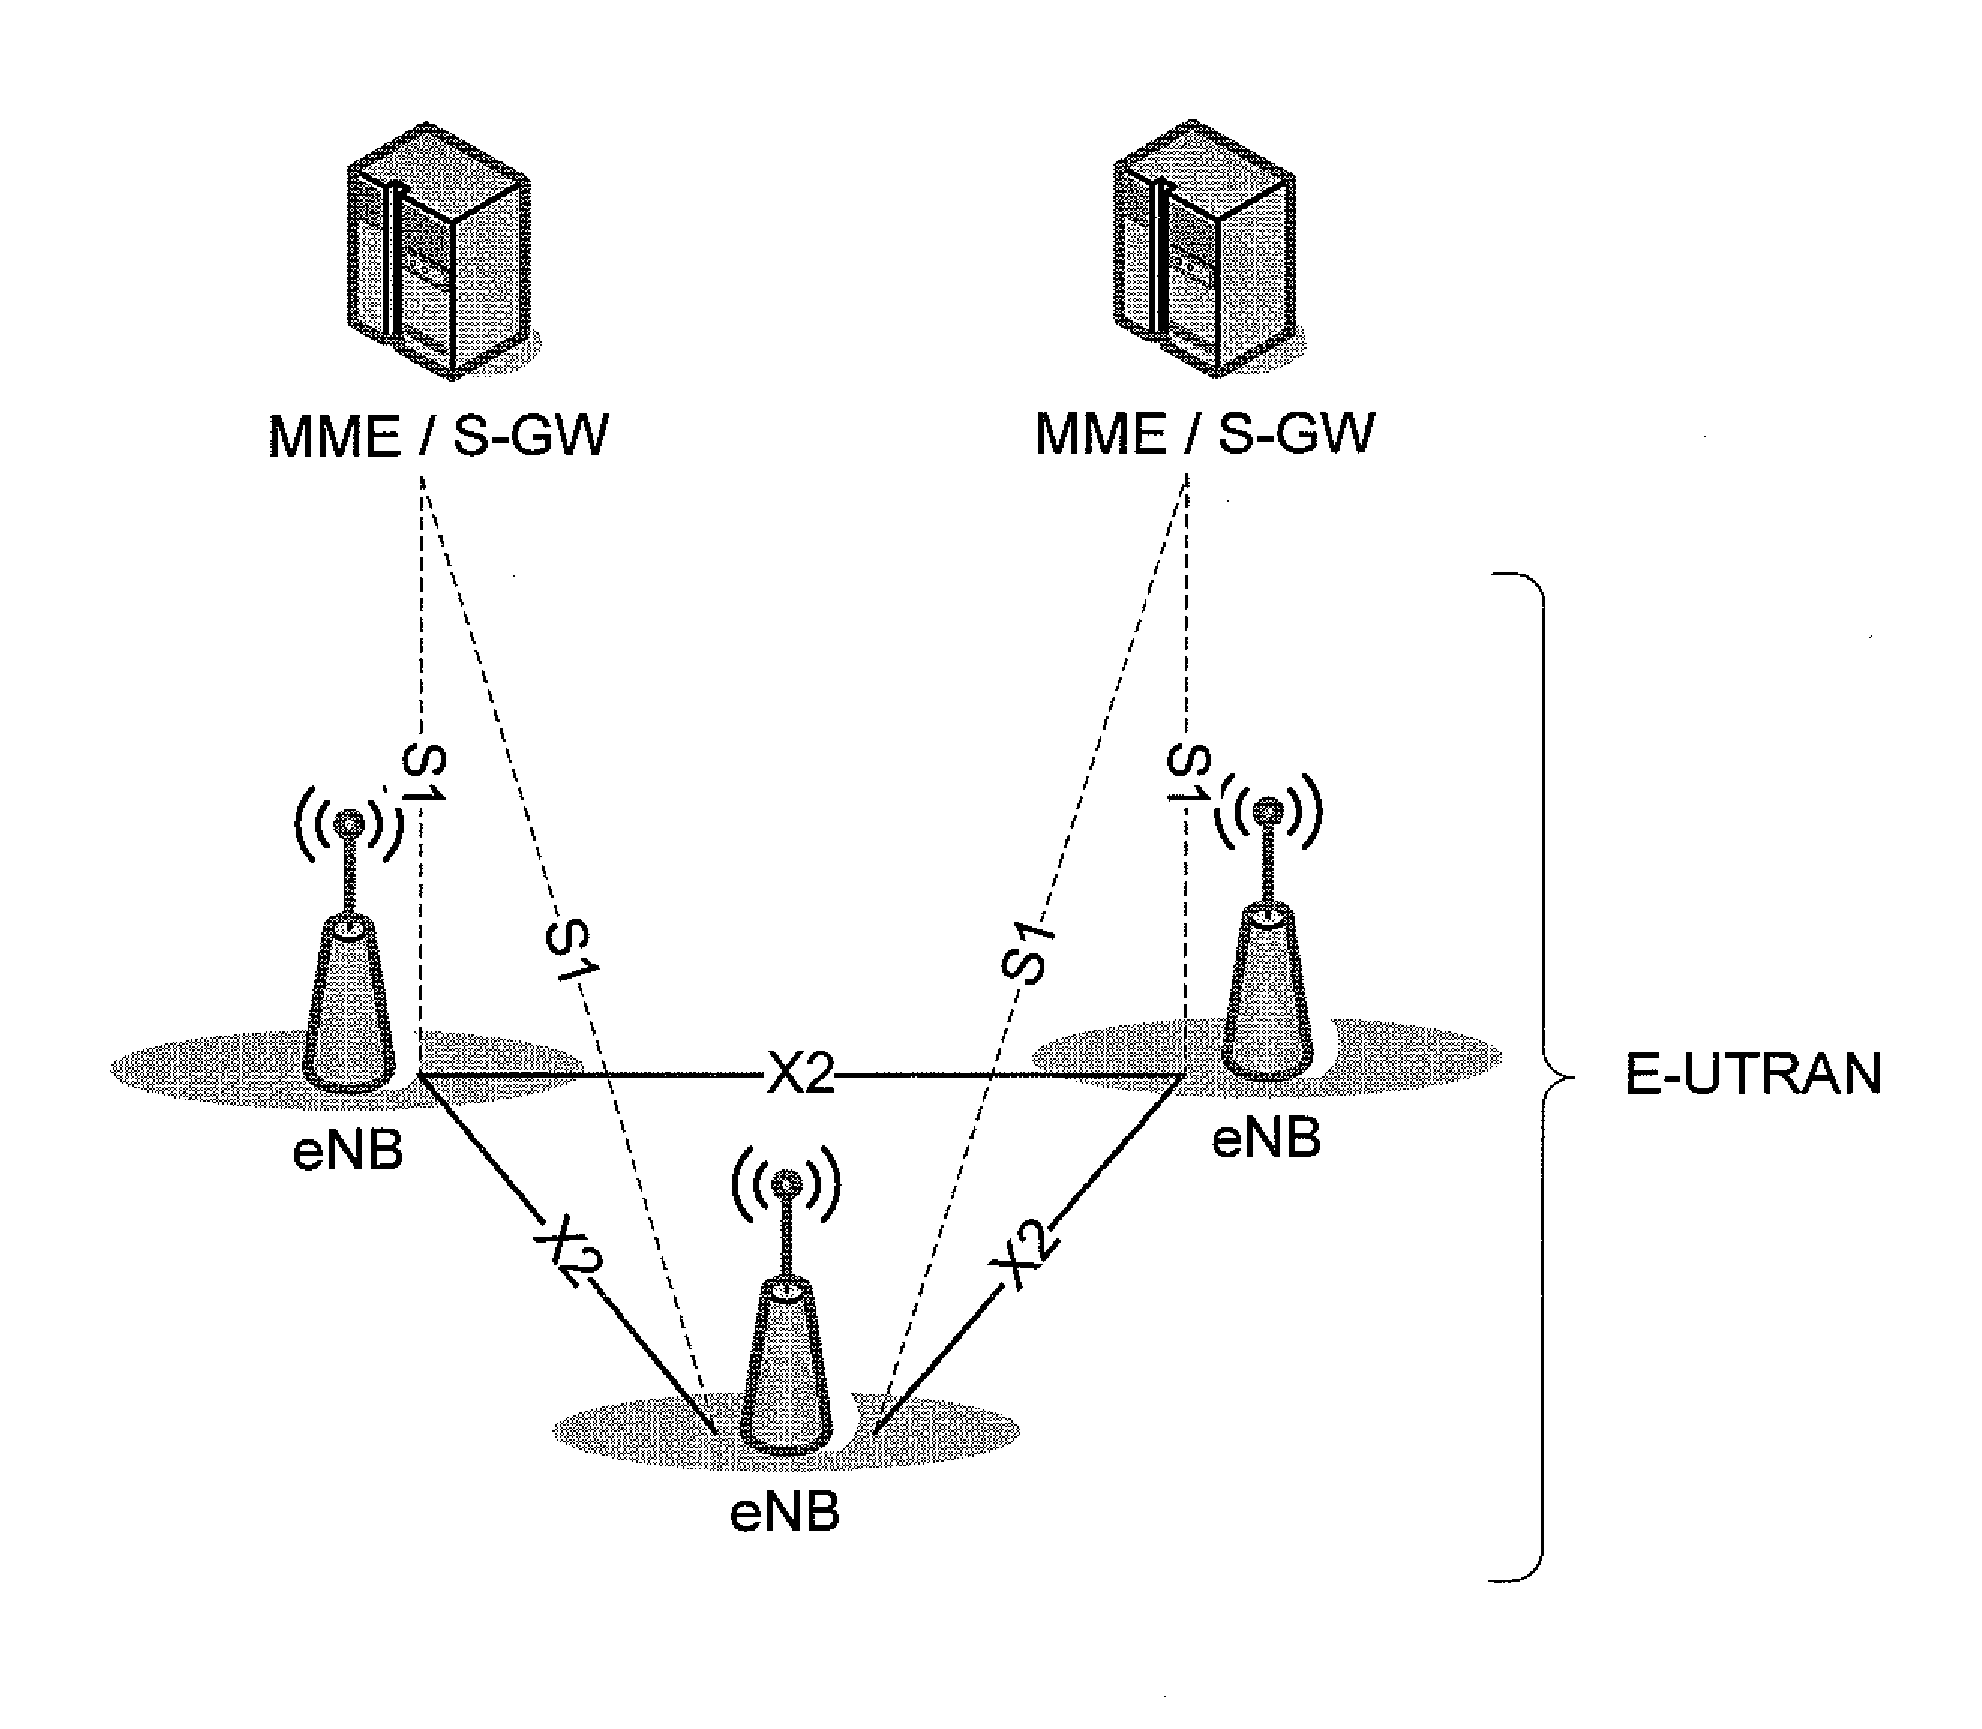 Method of Releasing An Access Restriction at High Interference Cell in a Wireless Communication System